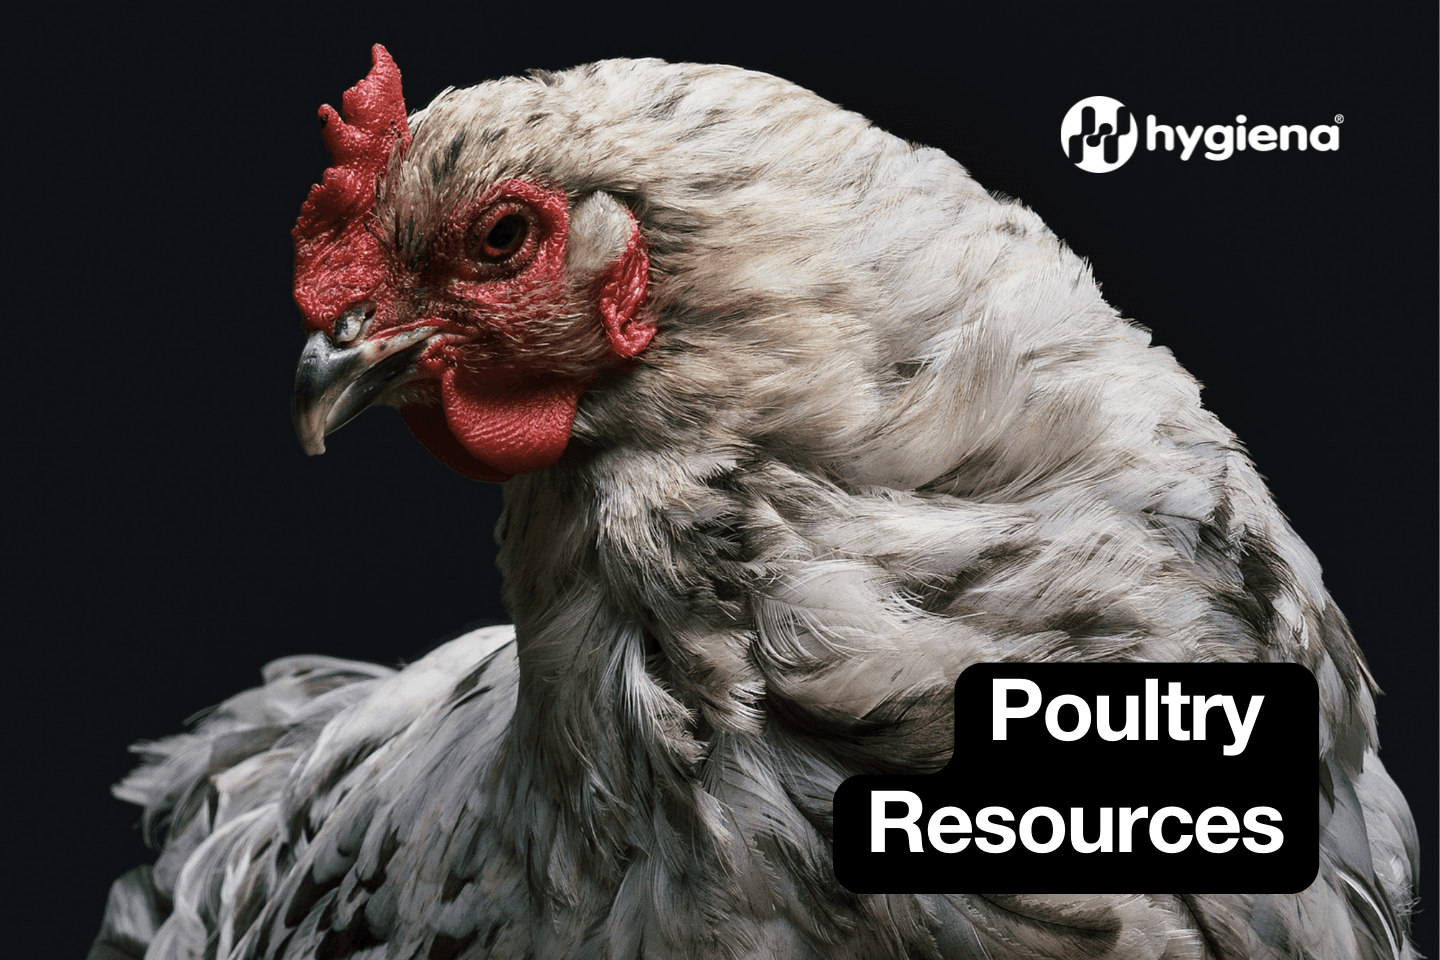 Poultry Resources